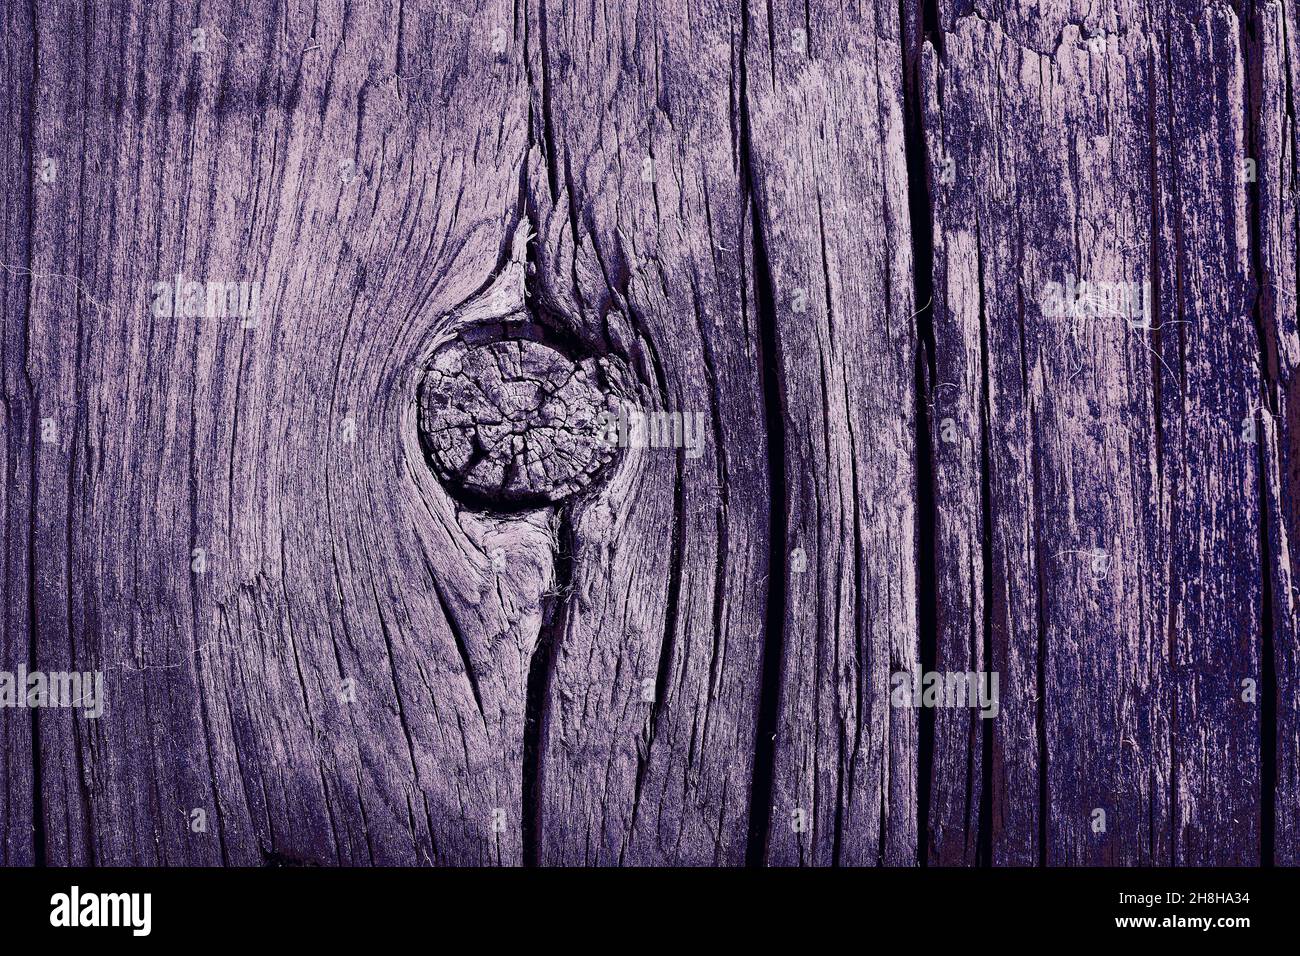 Old cracked wooden plank, textured background. Stock Photo